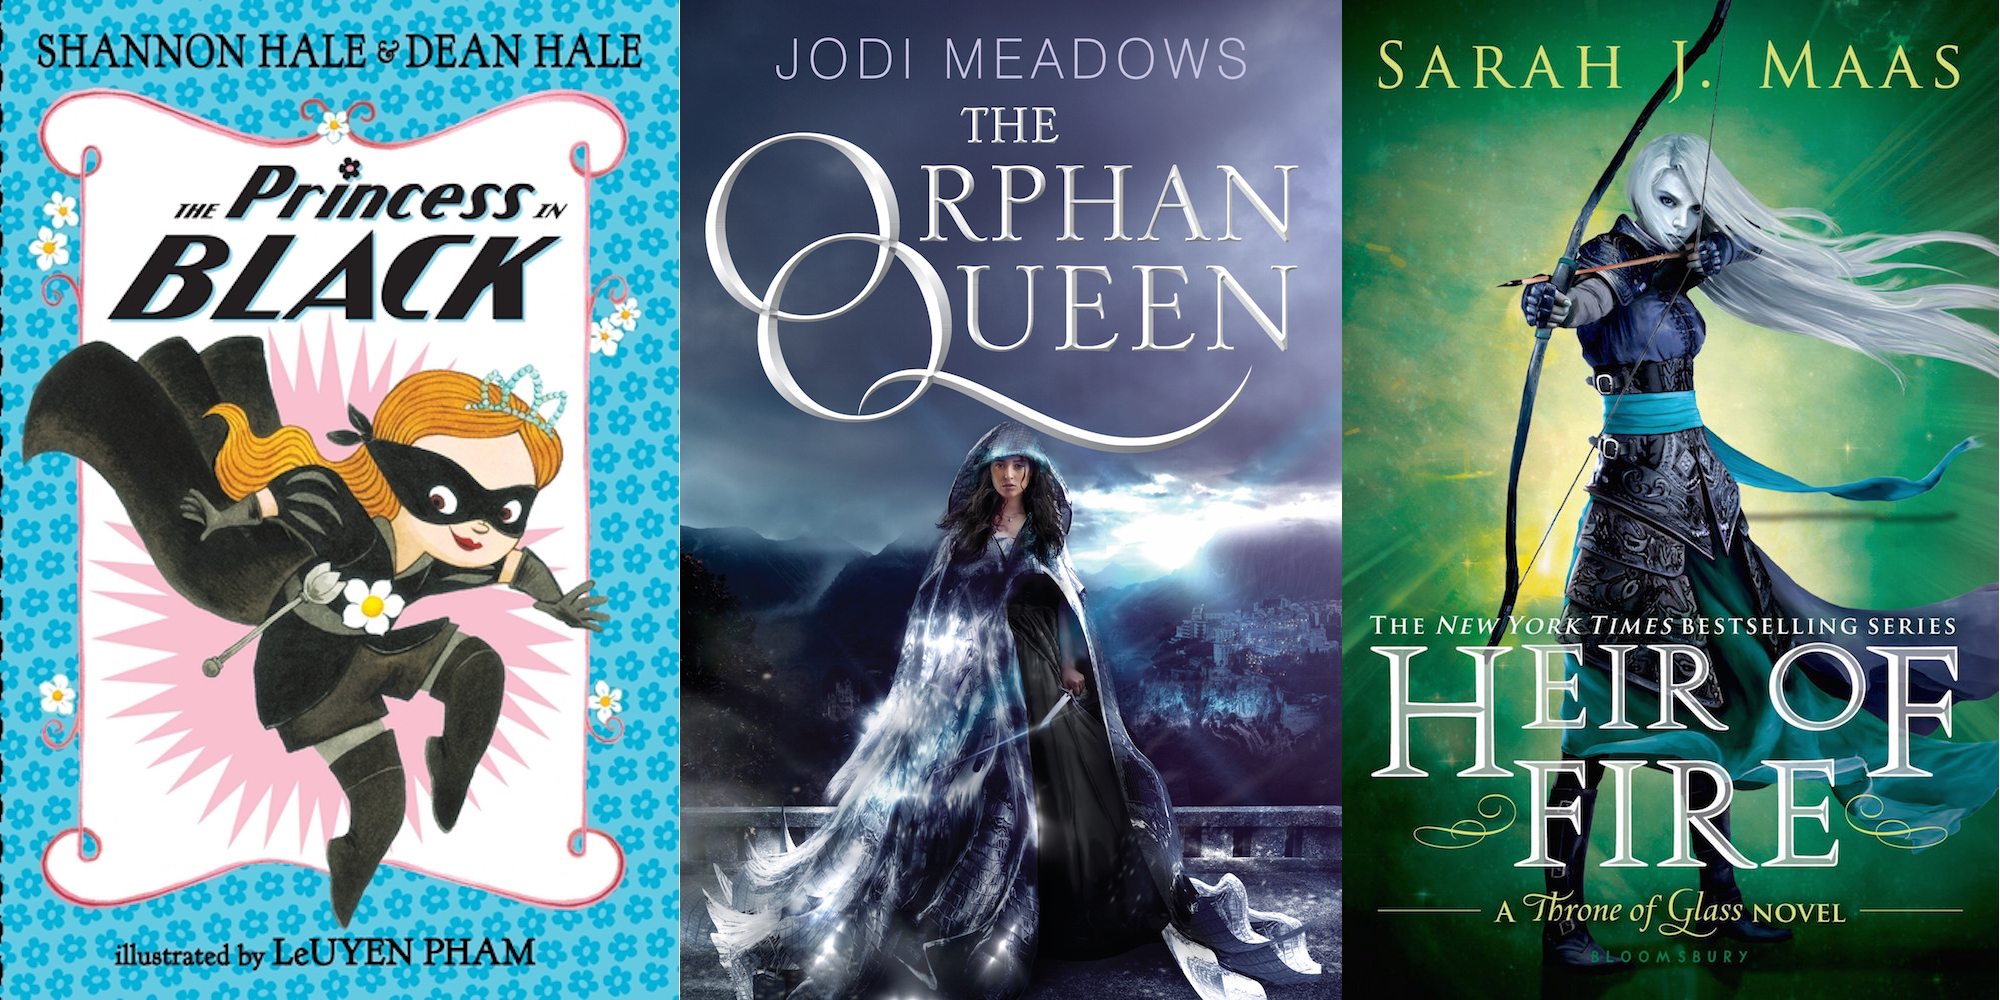 Covers for The Princess in Black, The Orphan Queen, and Heir of Fire